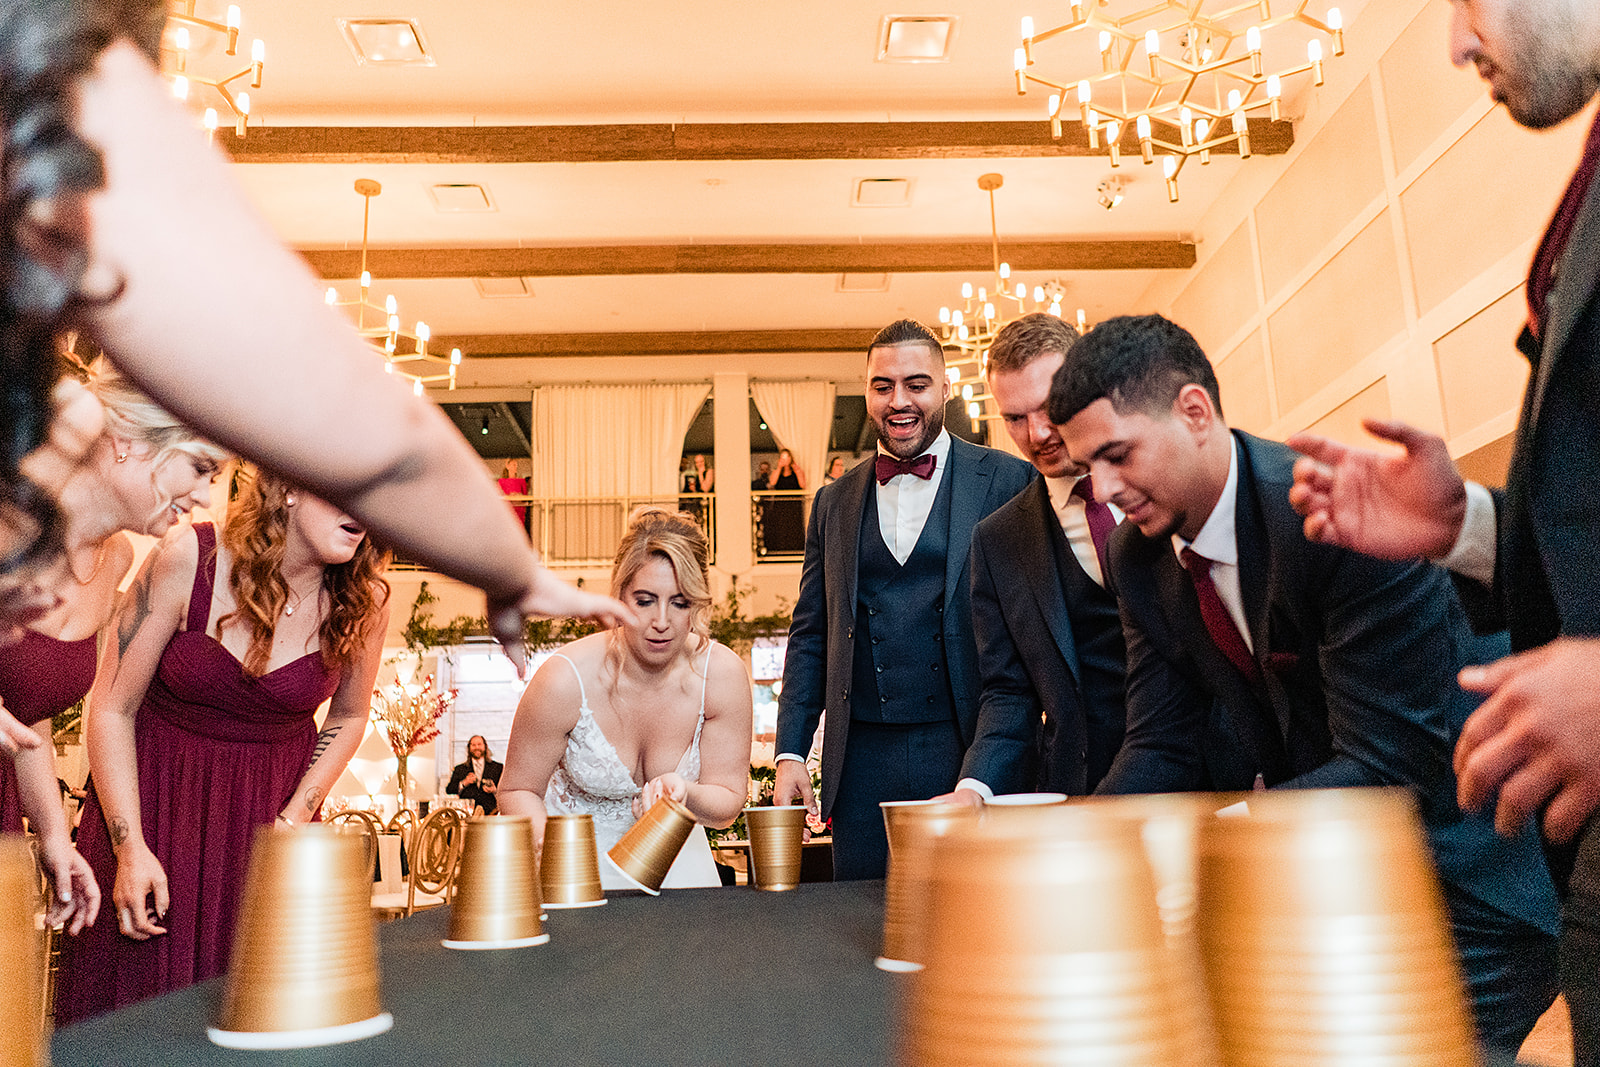 Flip cup game at the Lucy being played by the whole bridal party 